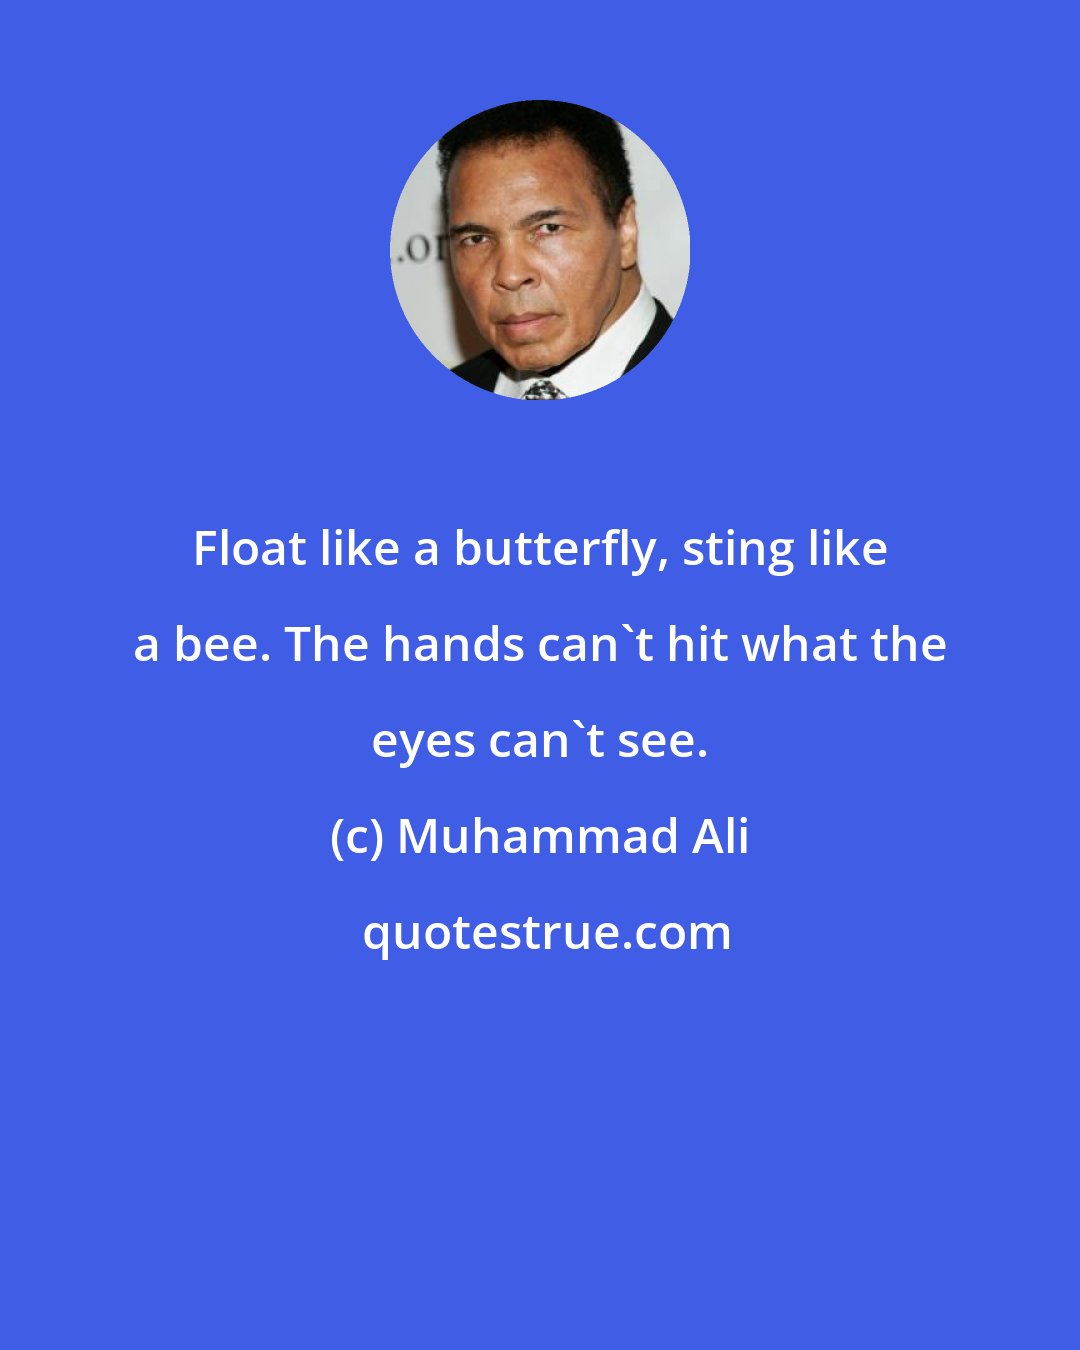 Muhammad Ali: Float like a butterfly, sting like a bee. The hands can't hit what the eyes can't see.